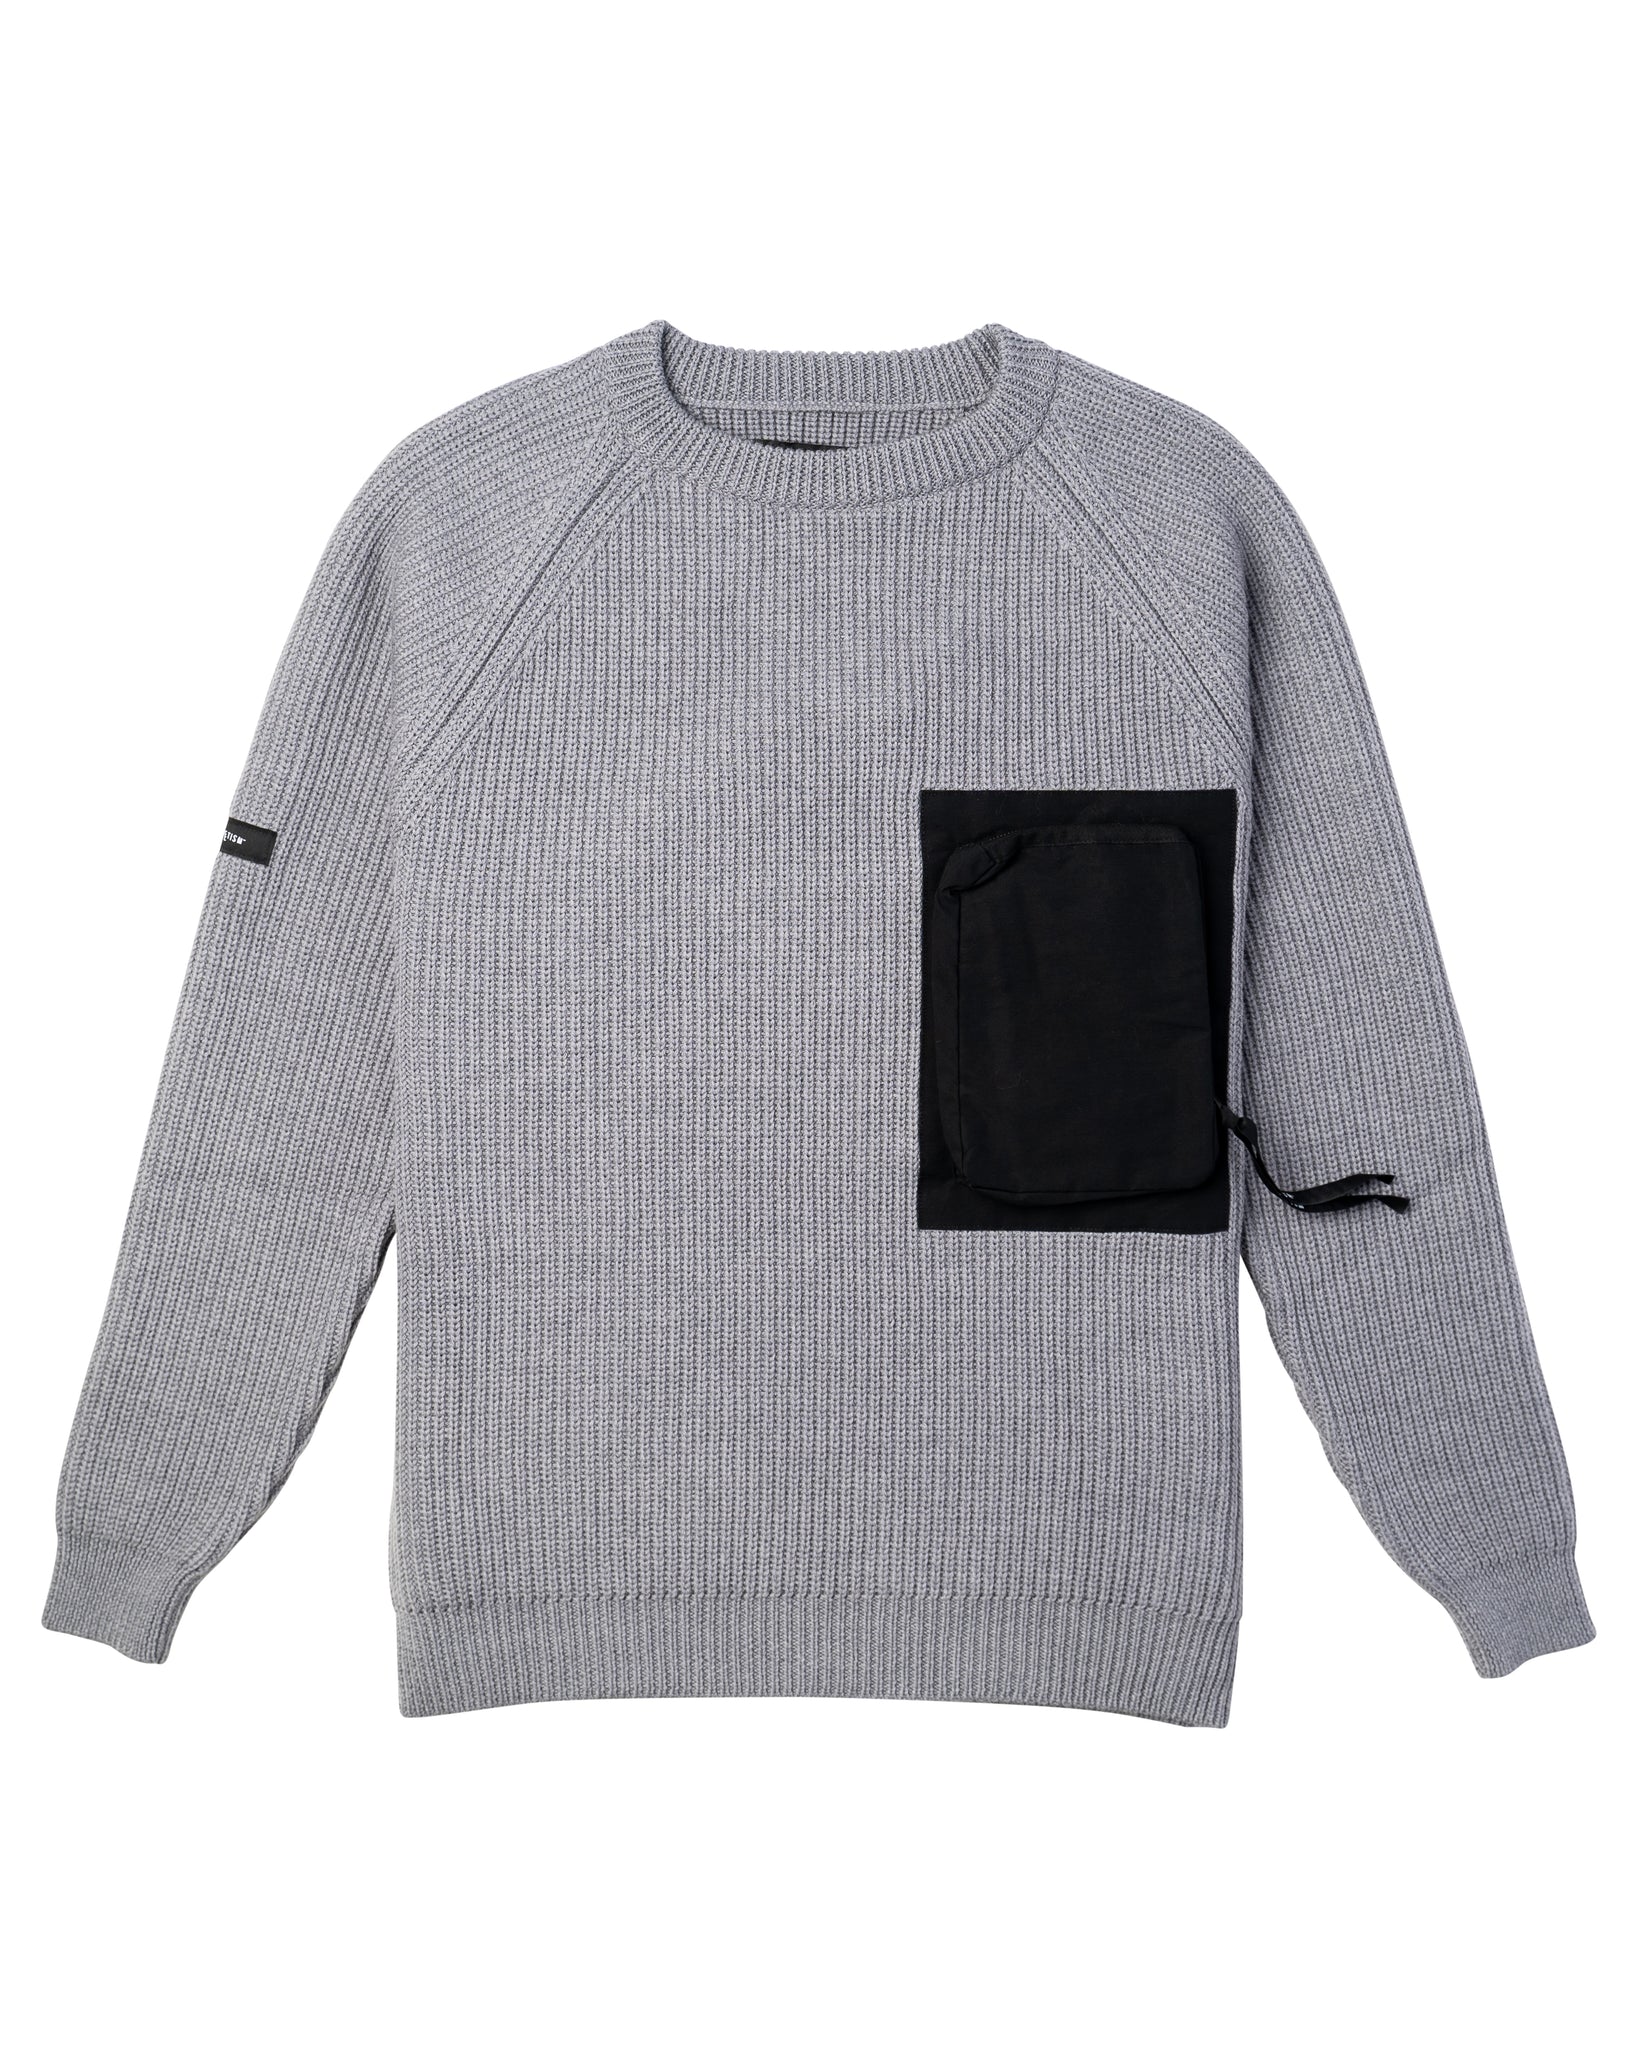 Tobias Birk Nielsen Knitted Sweater With Zipped Chest Pocket Grey/Black